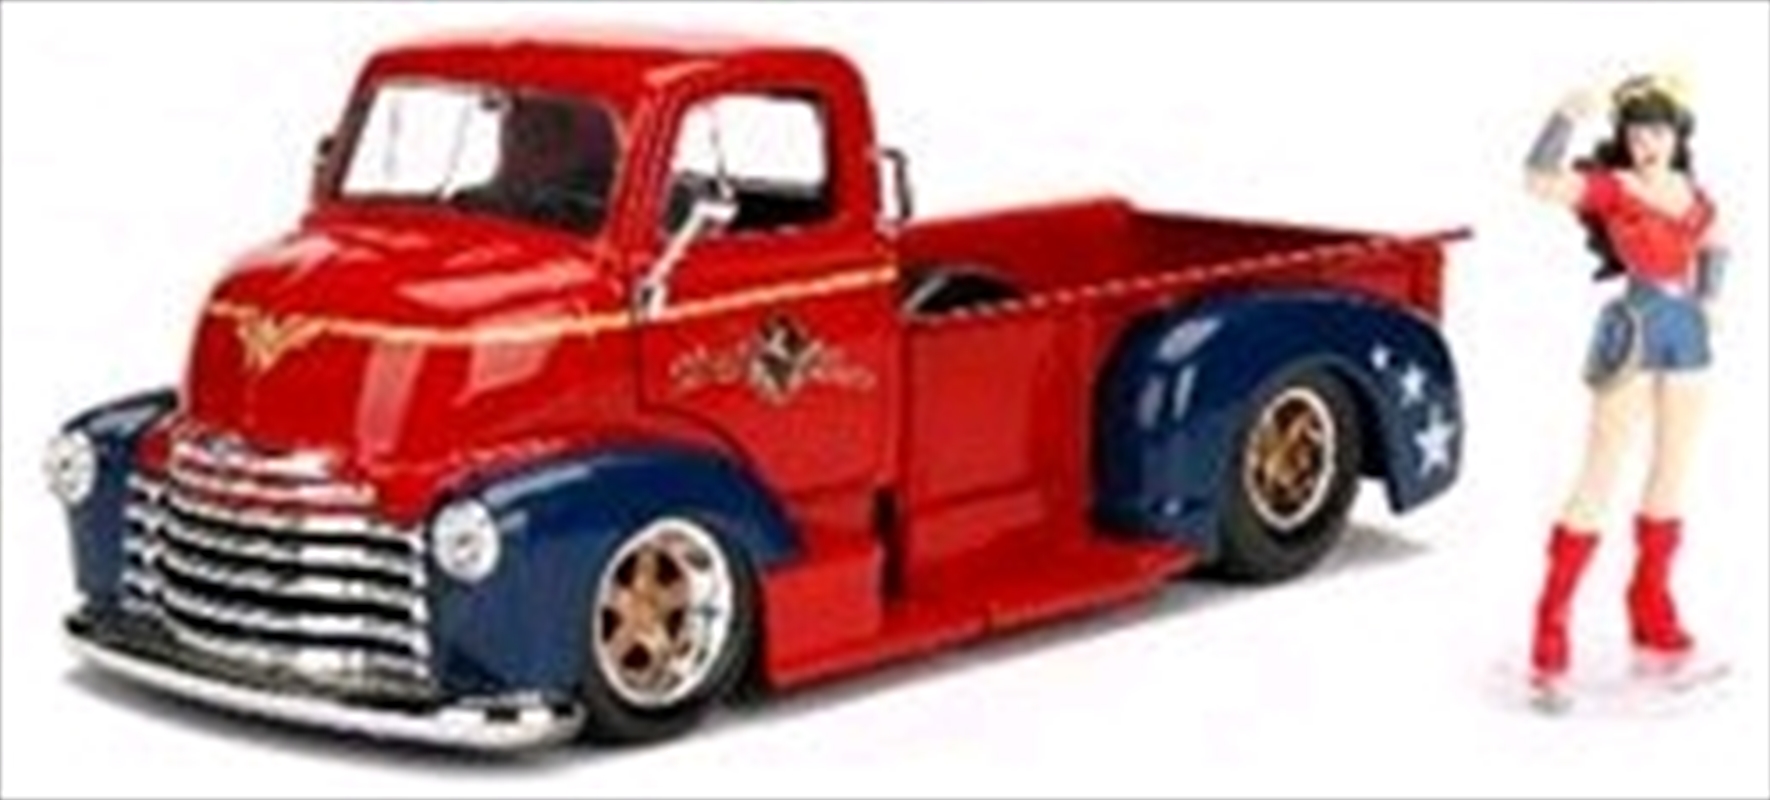 DC Bombshells - Wonder Woman Chevy Pickup 1:24 Scale Hollywood Rides Diecast Vehicle | Merchandise